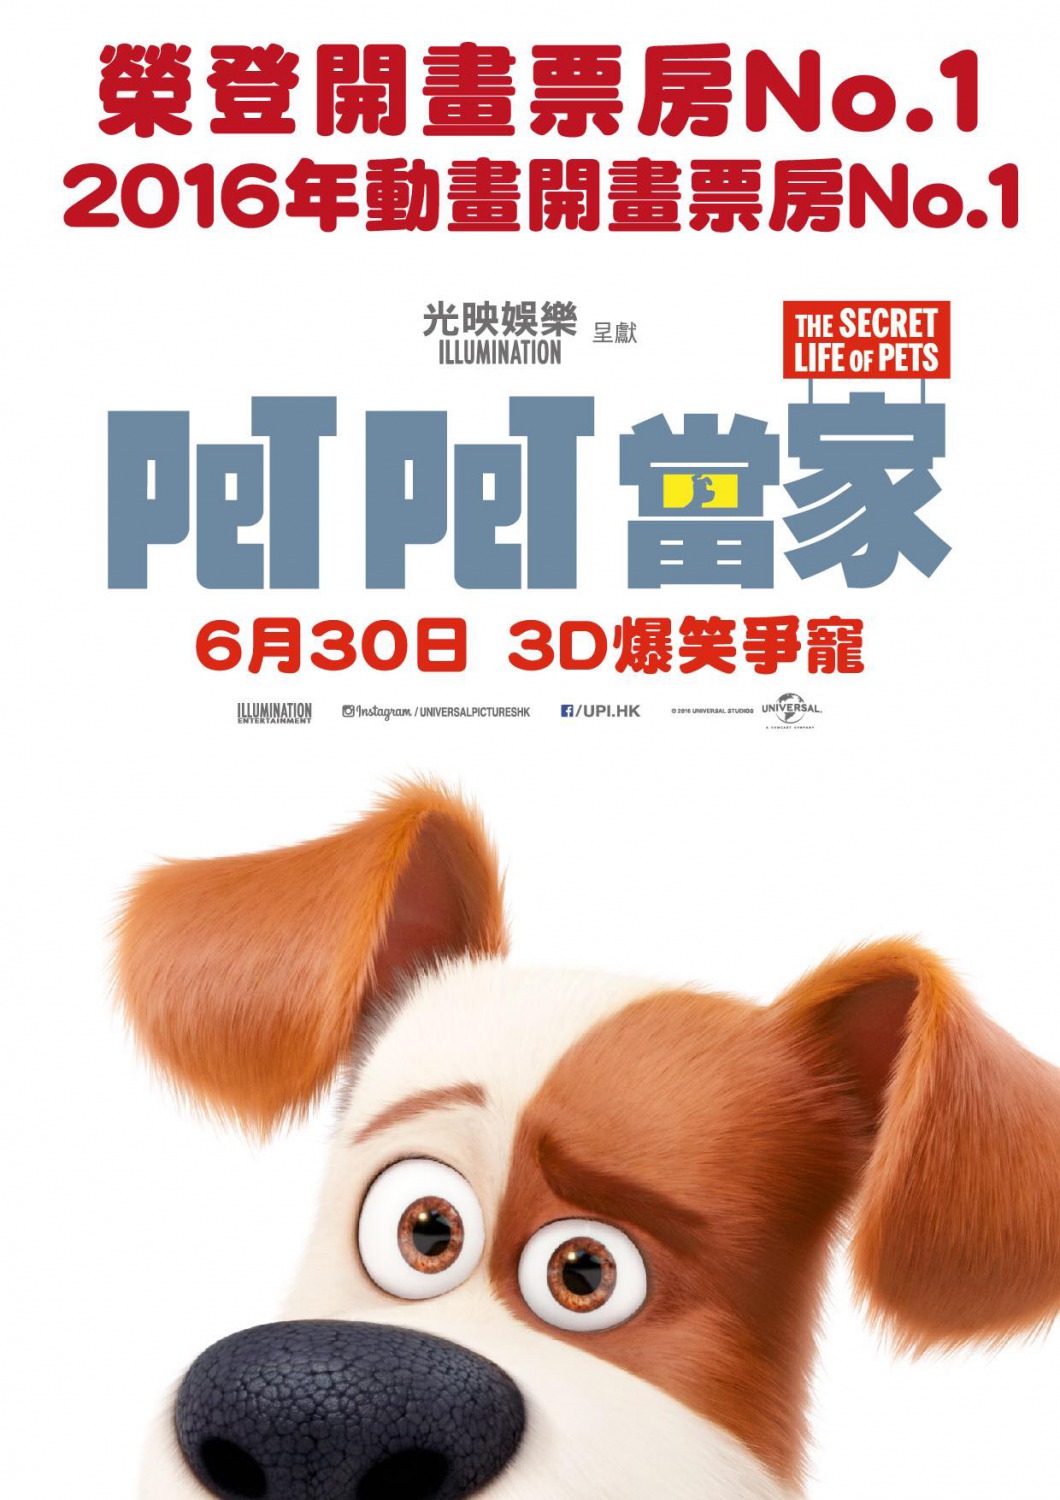 Extra Large Movie Poster Image for The Secret Life of Pets (#12 of 19)